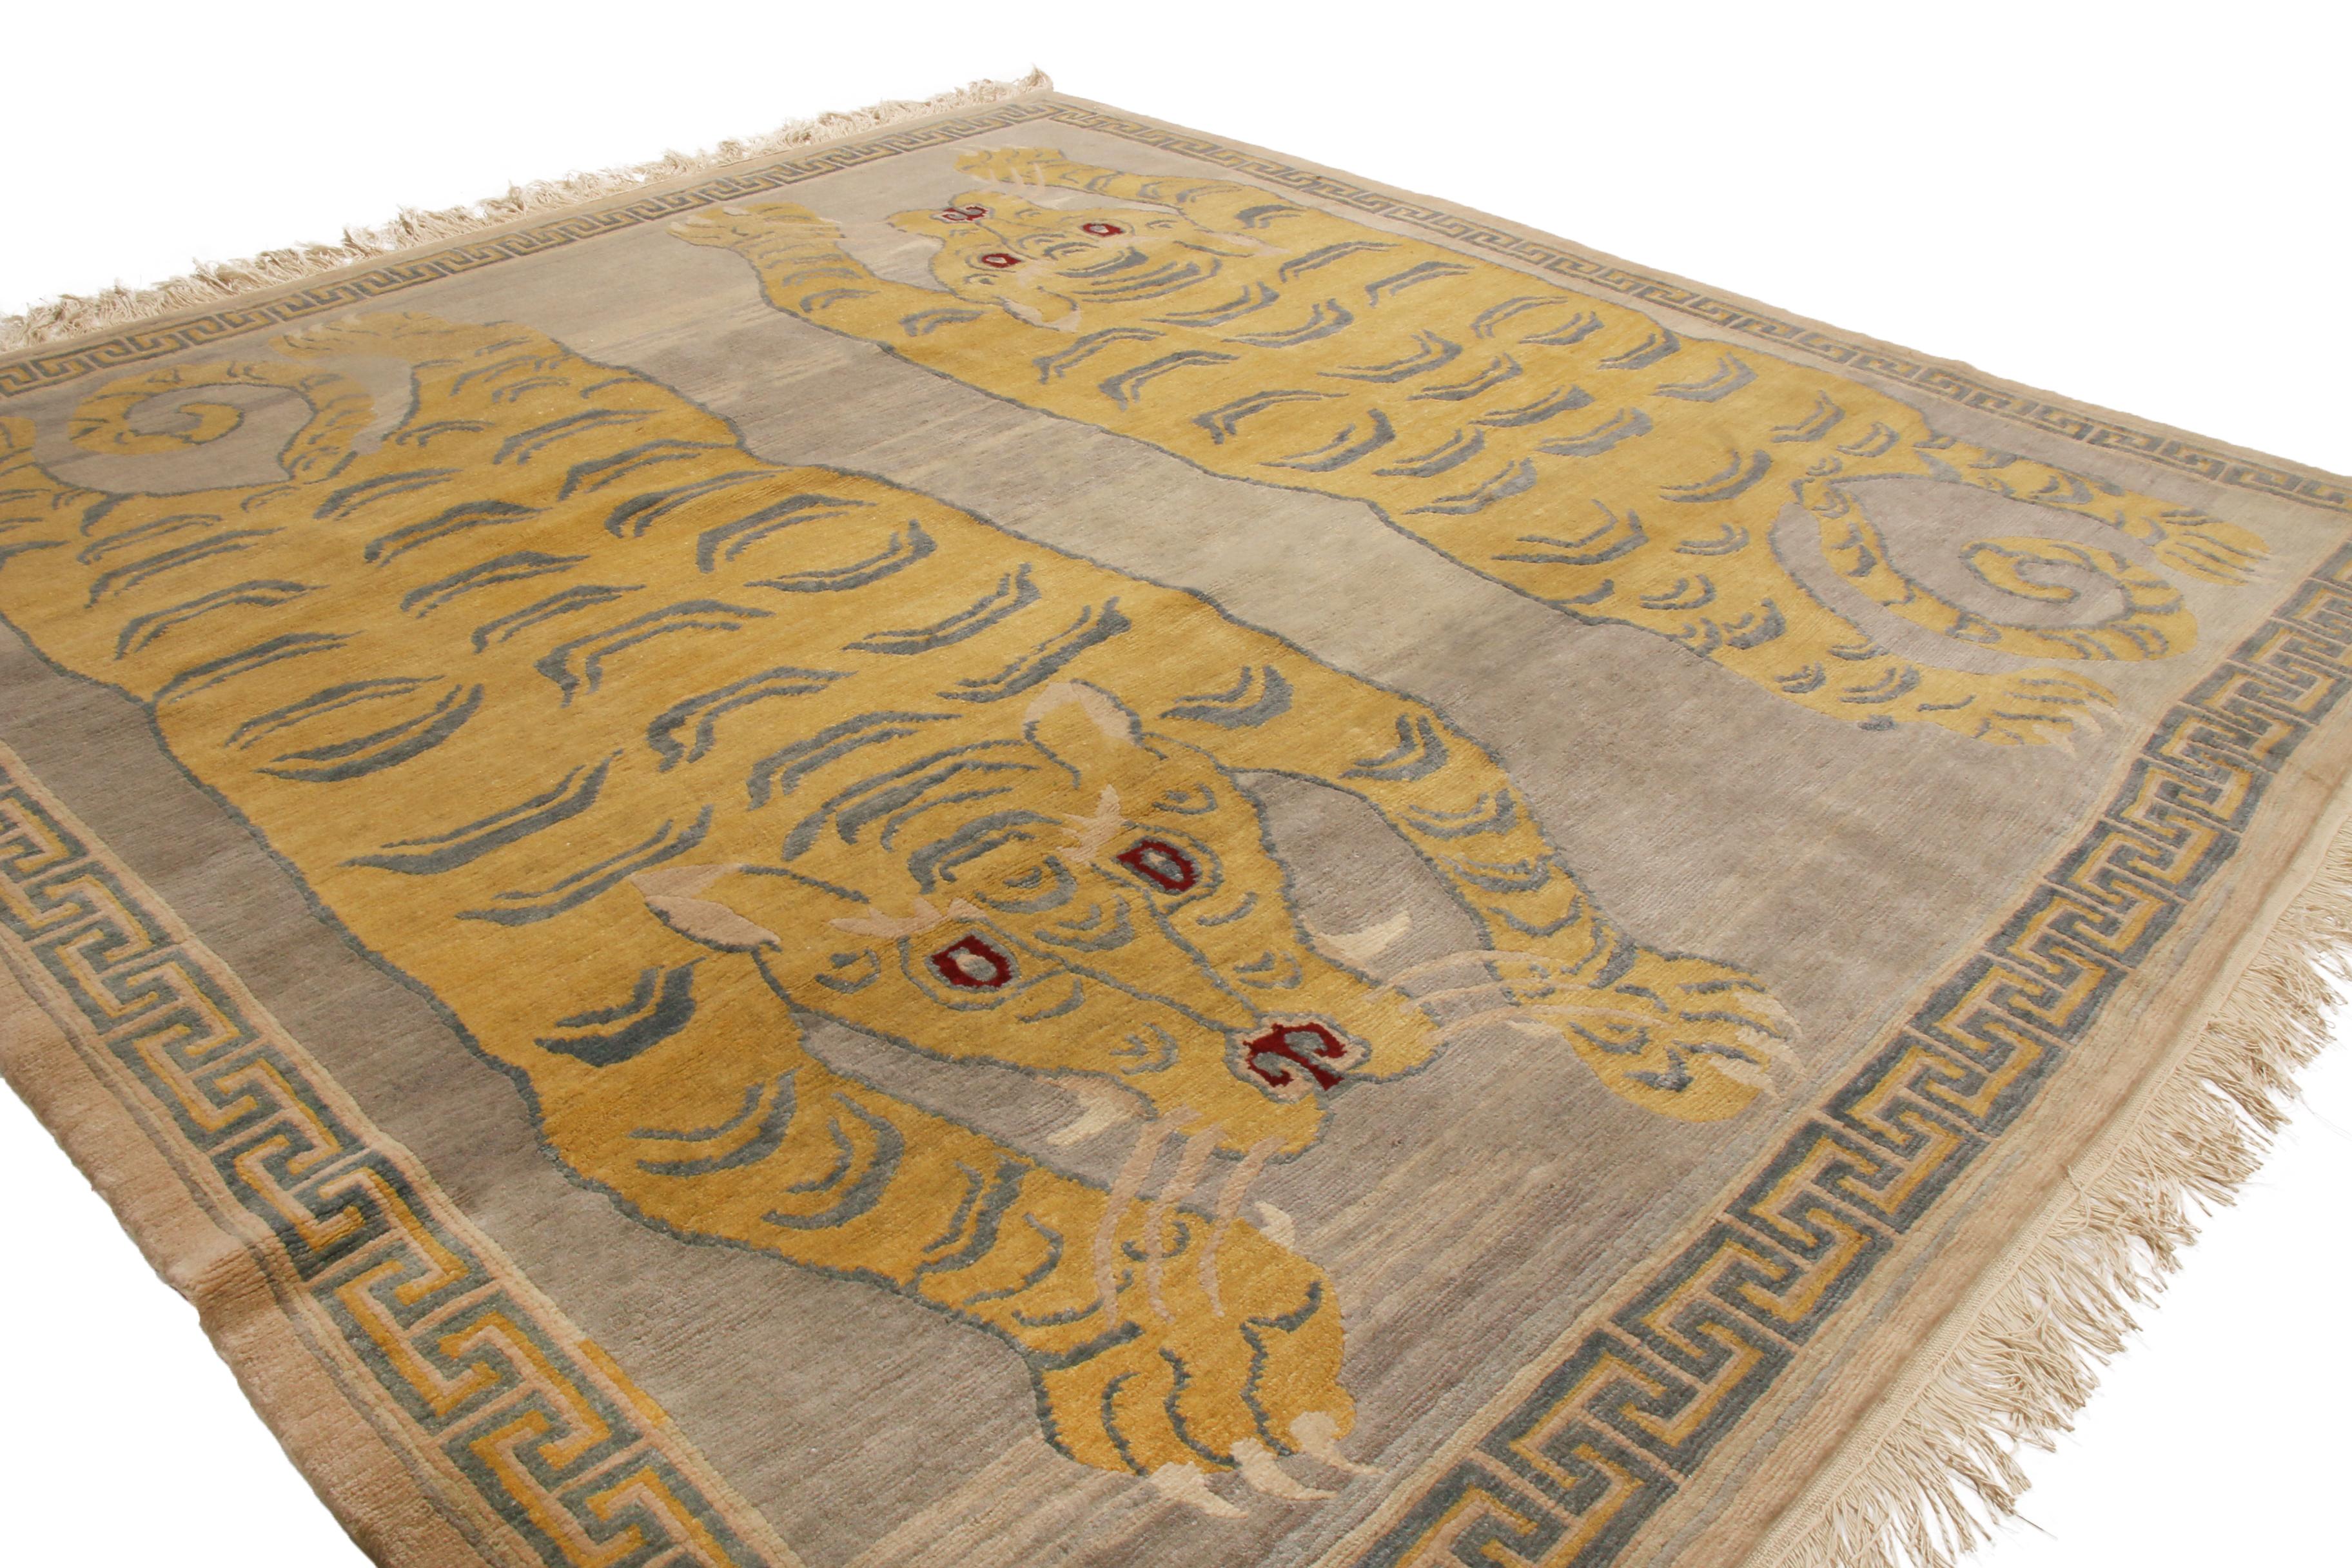 Hand-Knotted Tigris Nepalese Orange and Beige Wool Rug